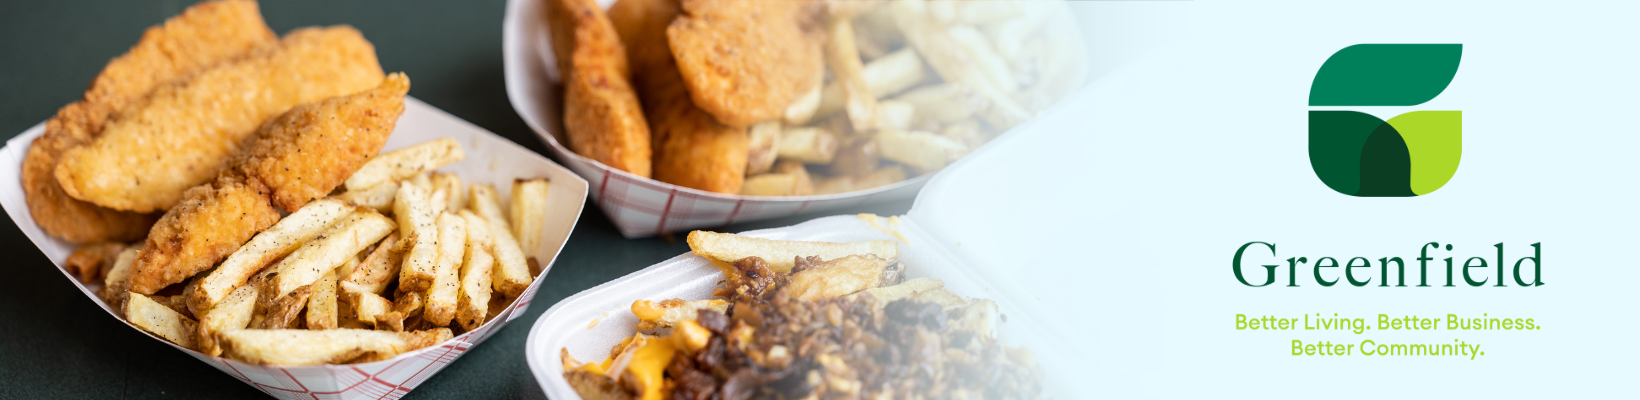 Chicken tenders and fries pictured in serving container 